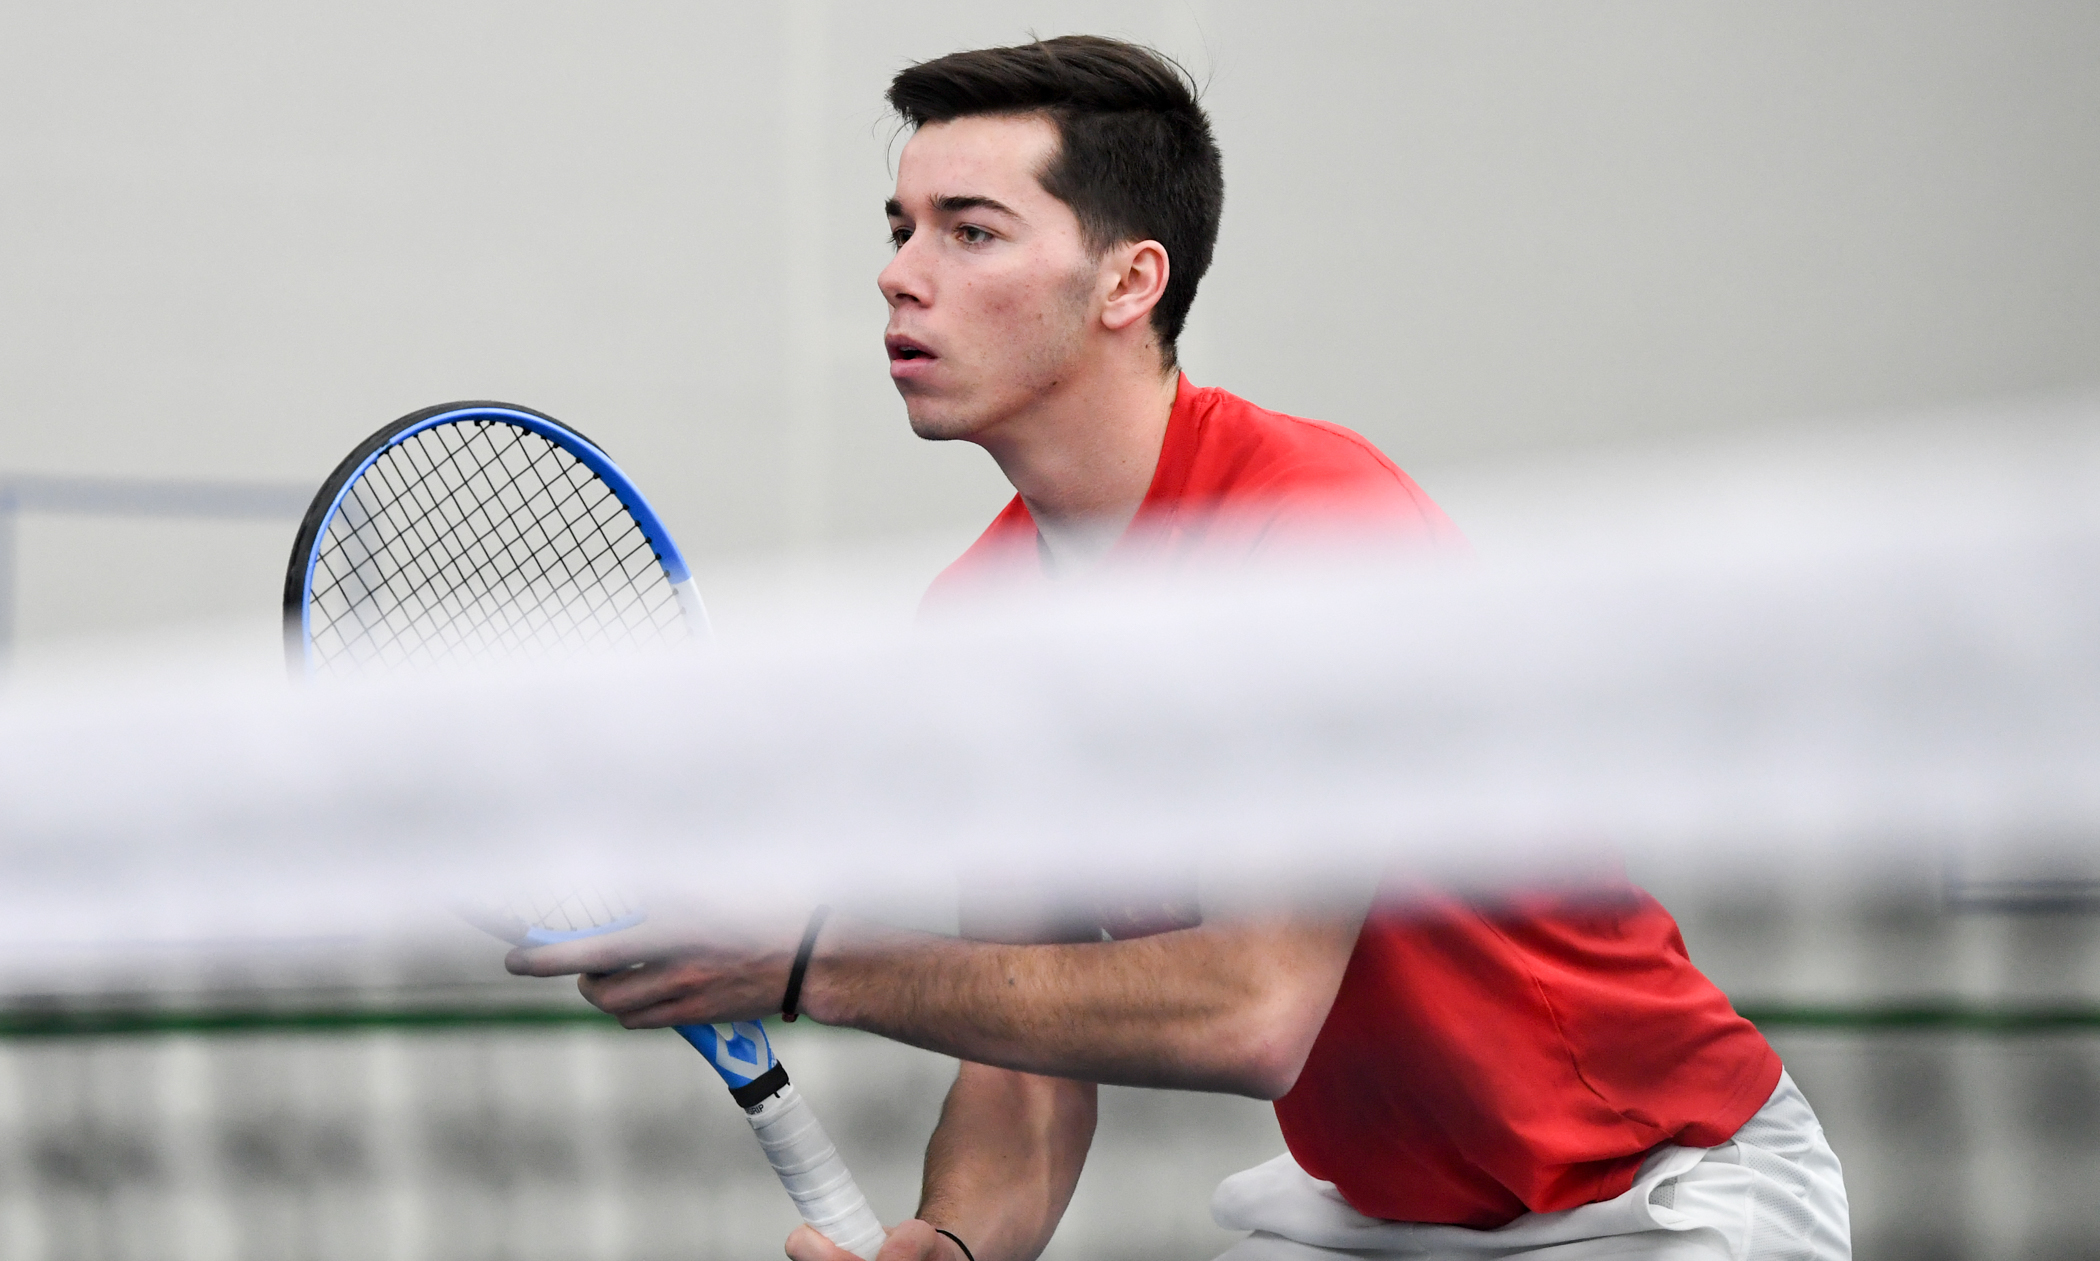 Ferris State Notches Third-Straight Win With Dominating Men's Tennis Performance